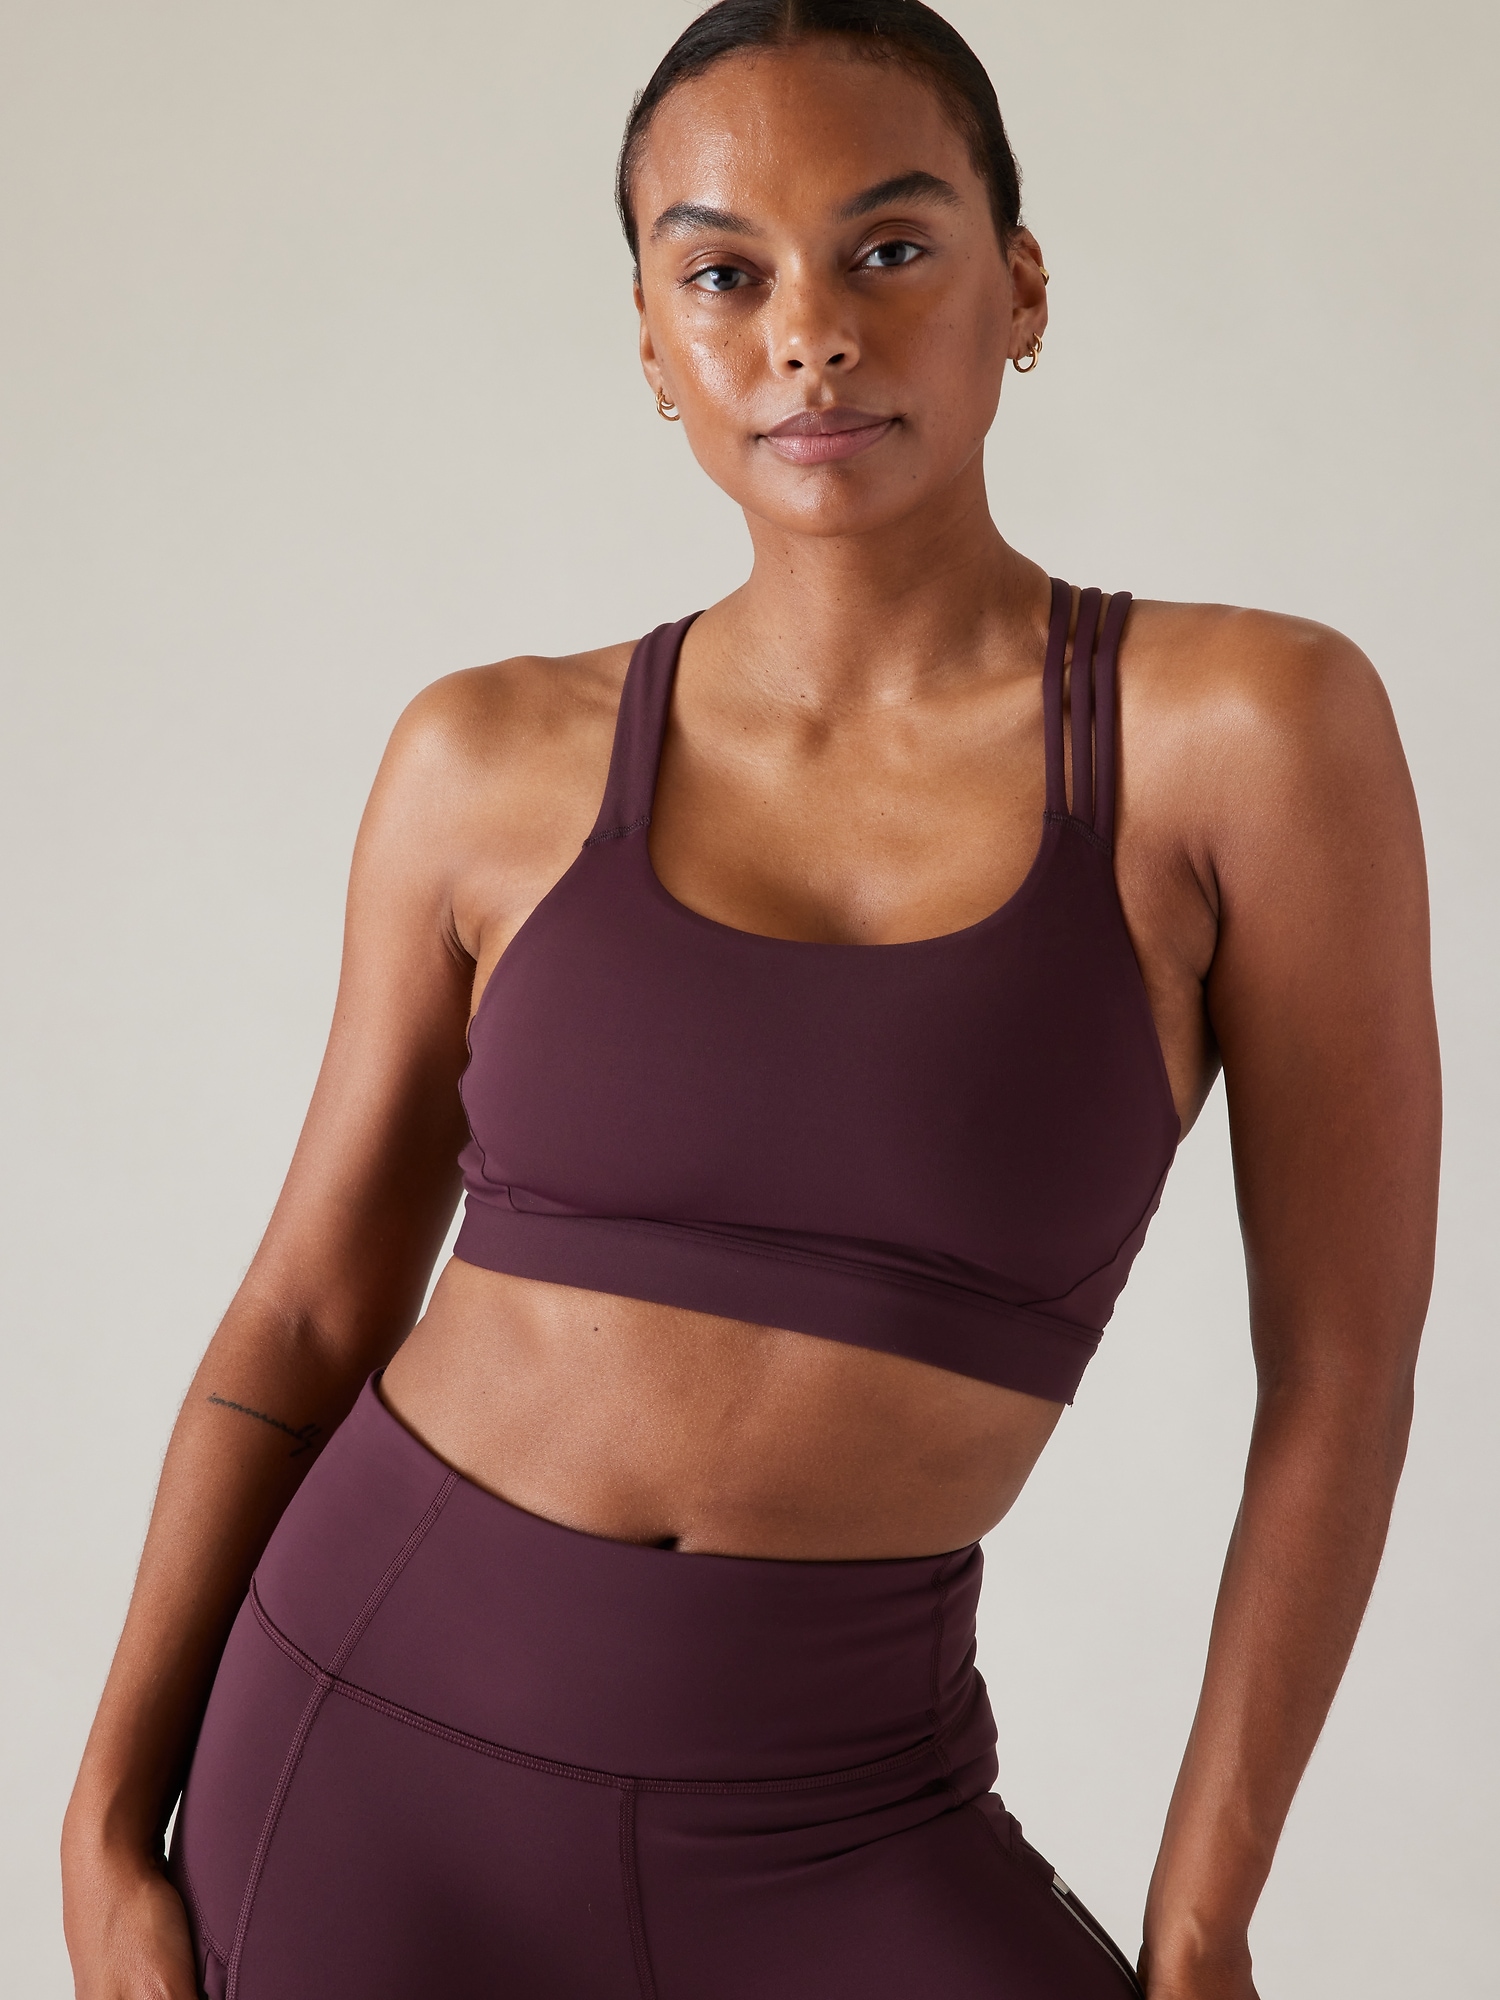 Athleta Asana Sports Bra D/DD Size Small Cottage Blue NWT Retail $59 Sold  Out!